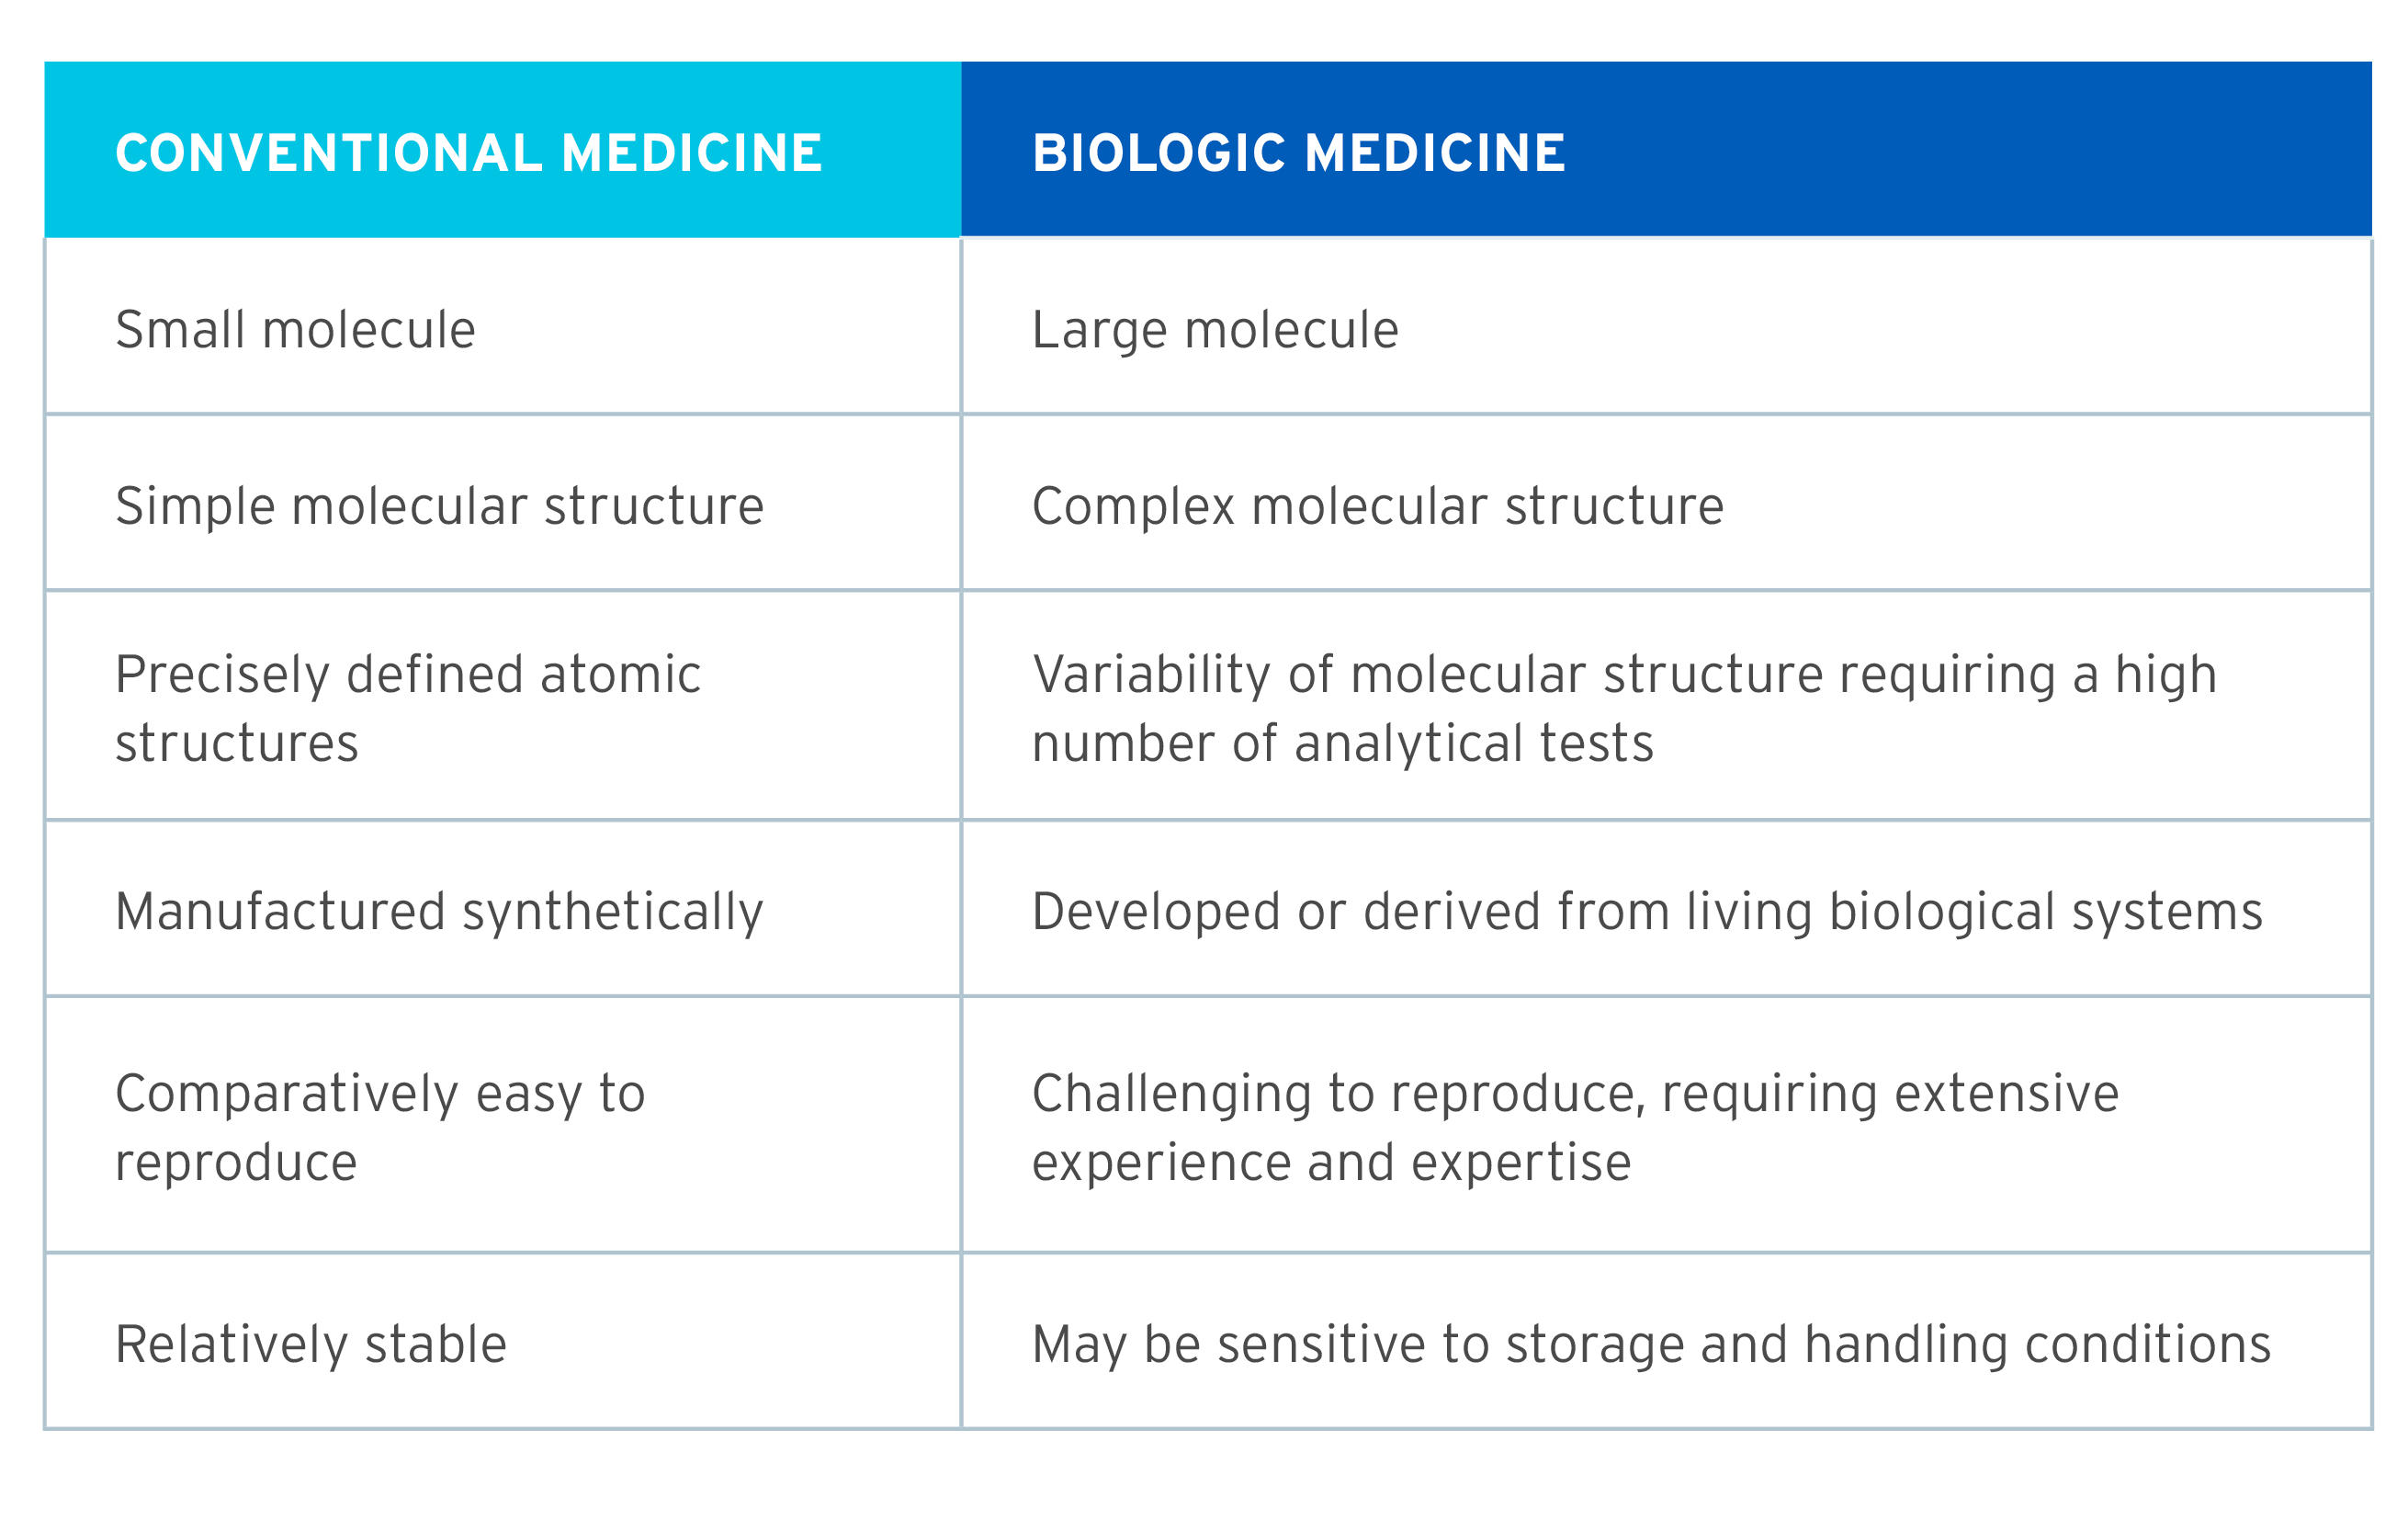 A table contrasting the differences between conventional medicine and biologic medicine